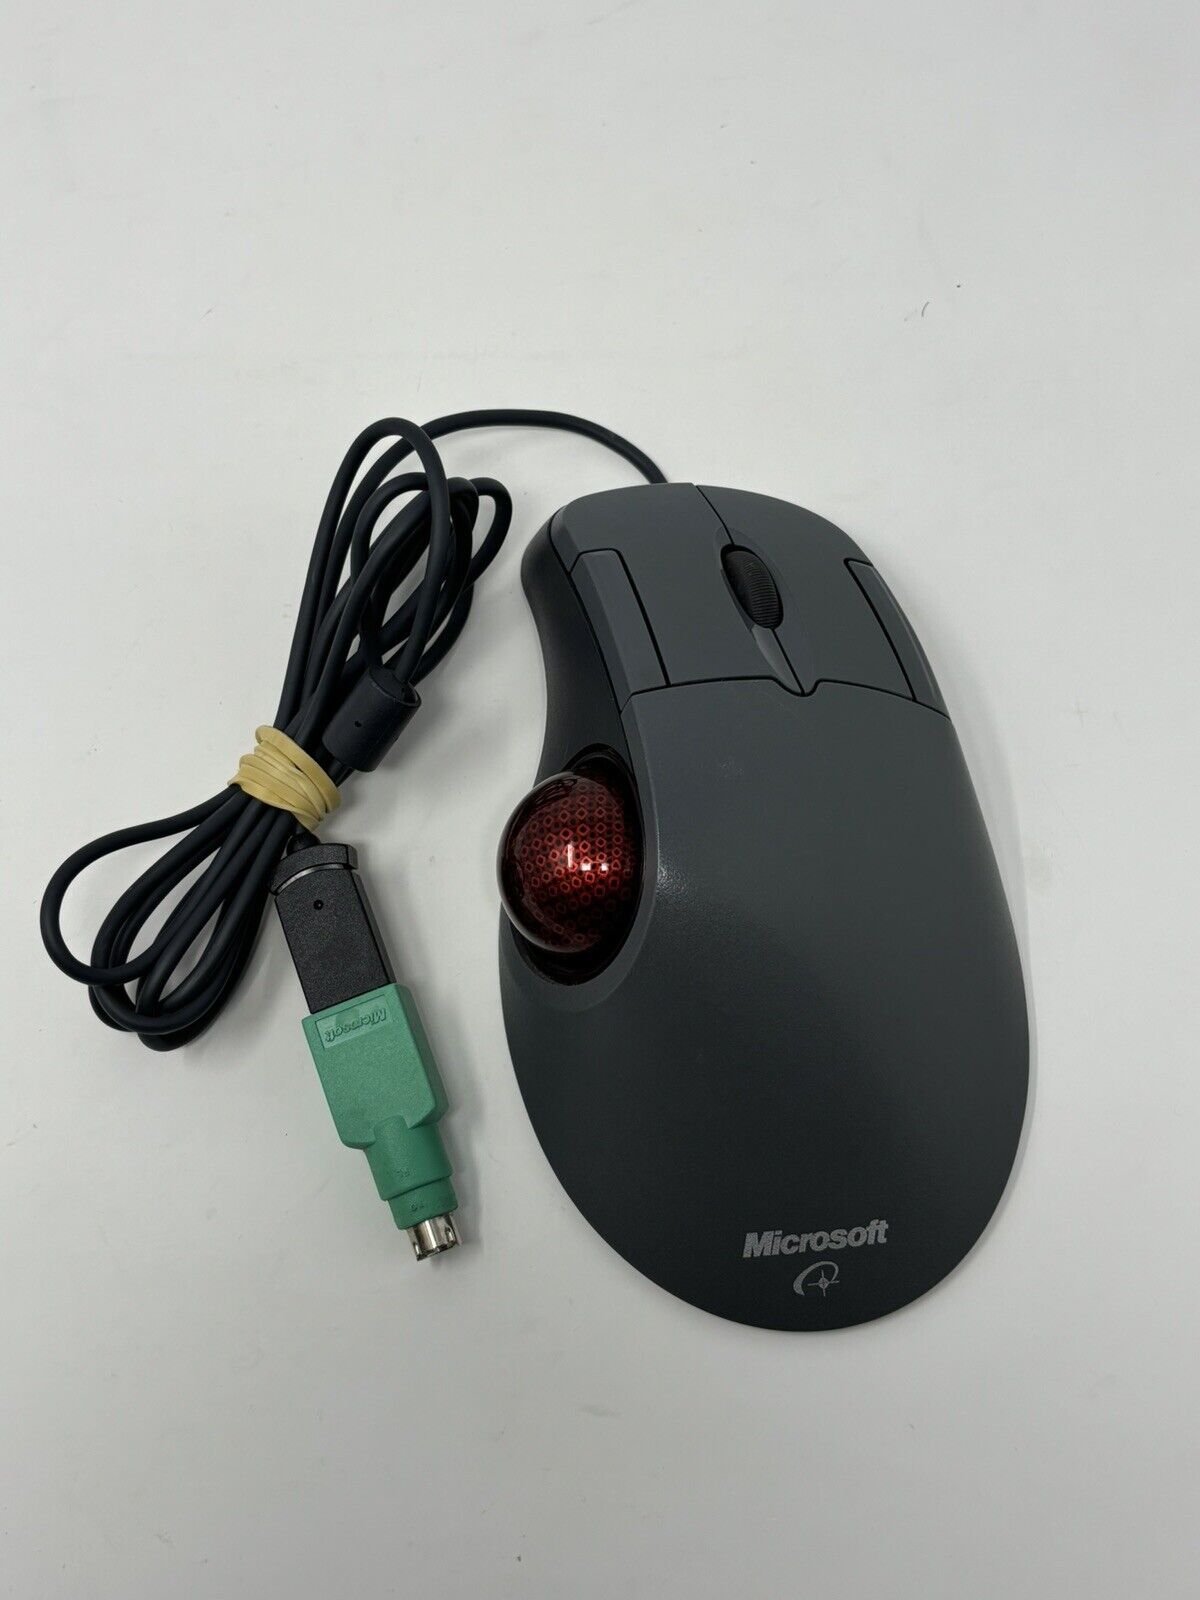 Microsoft Trackball Optical 1.0 PS2/USB X08-70386 Mouse Tested working